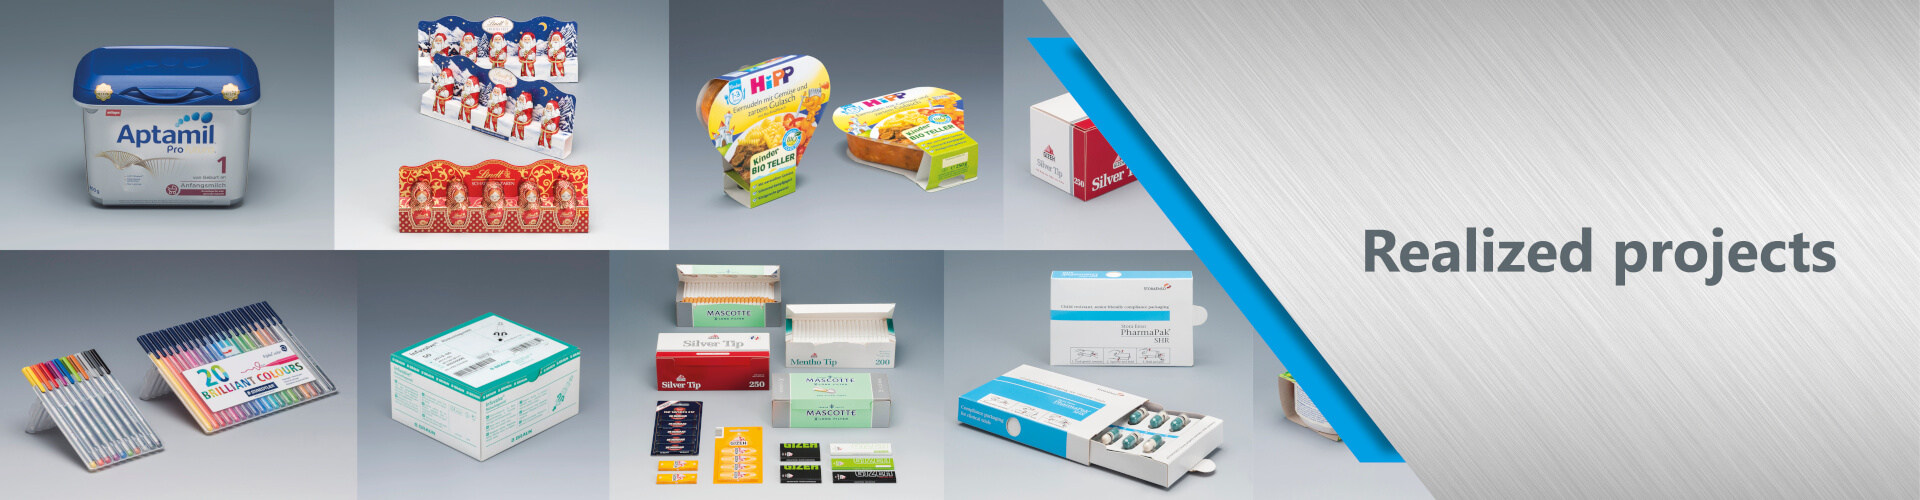 Our realized packagings range from stabilo folders to baby food.